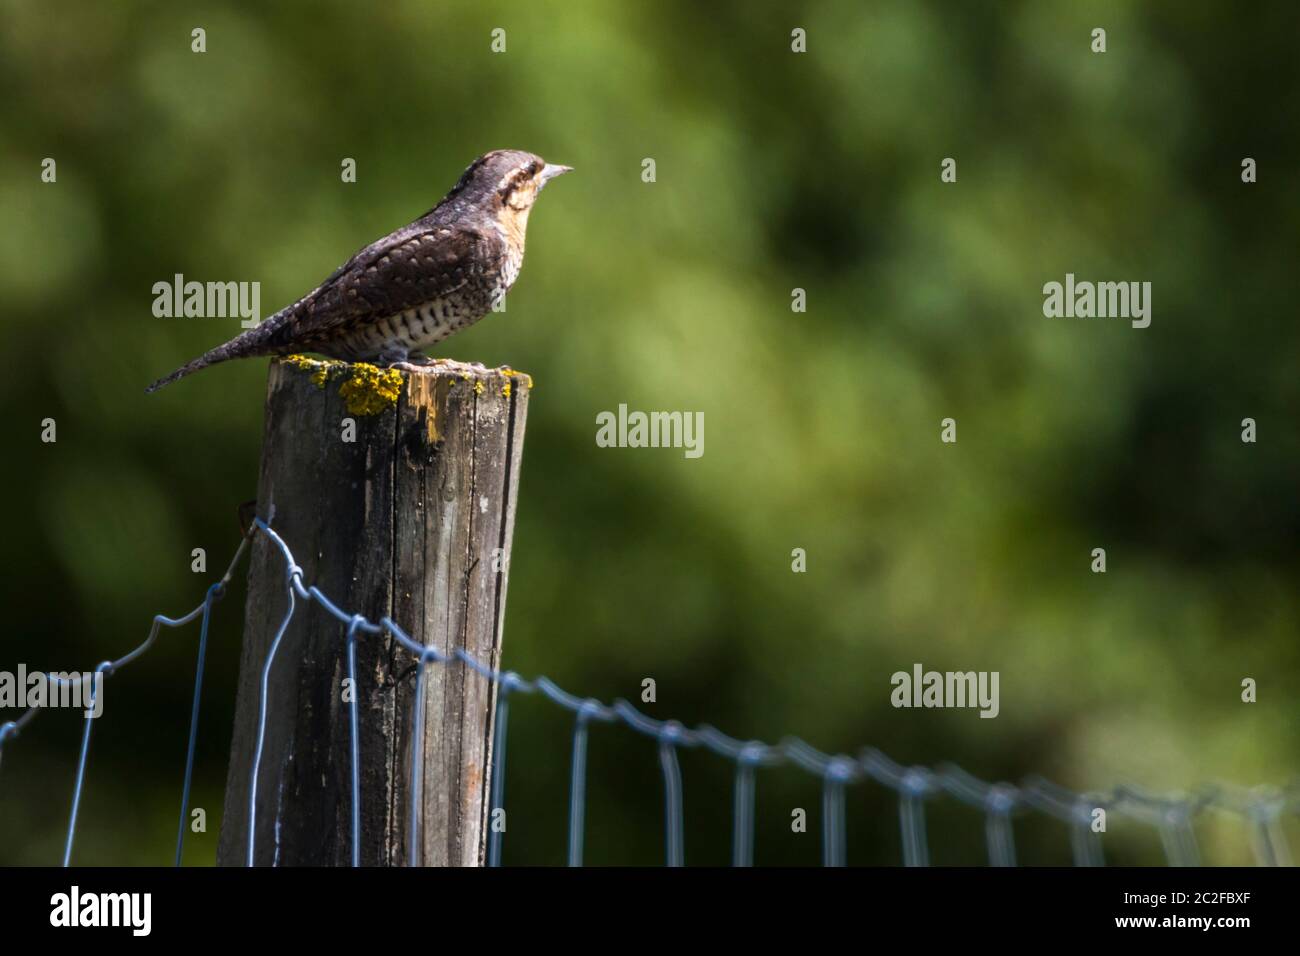 An eurasian wryneck is sitting on a fencing post Stock Photo